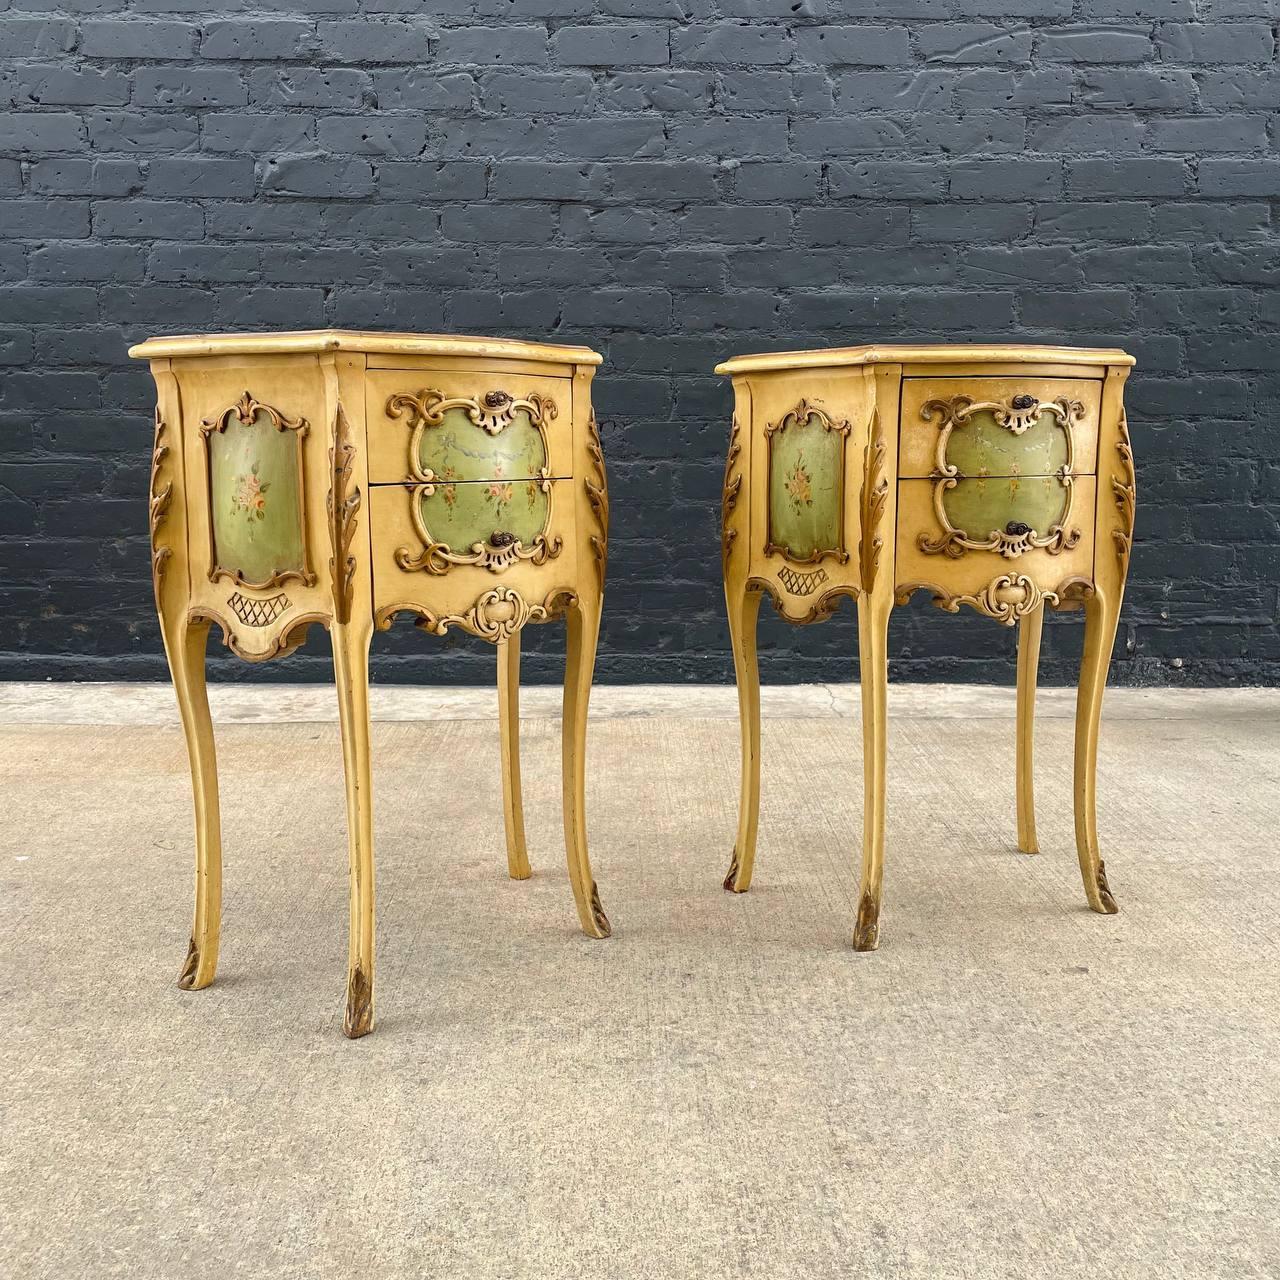 Pair of Antique French Provincial Night Stands or End Tables

Country: France
Materials: Hand Painted Carved Wood
Style: French Antique
Year: 1960s

$2,495 pair 

Dimensions 
29”H x 21”W x 12”D.